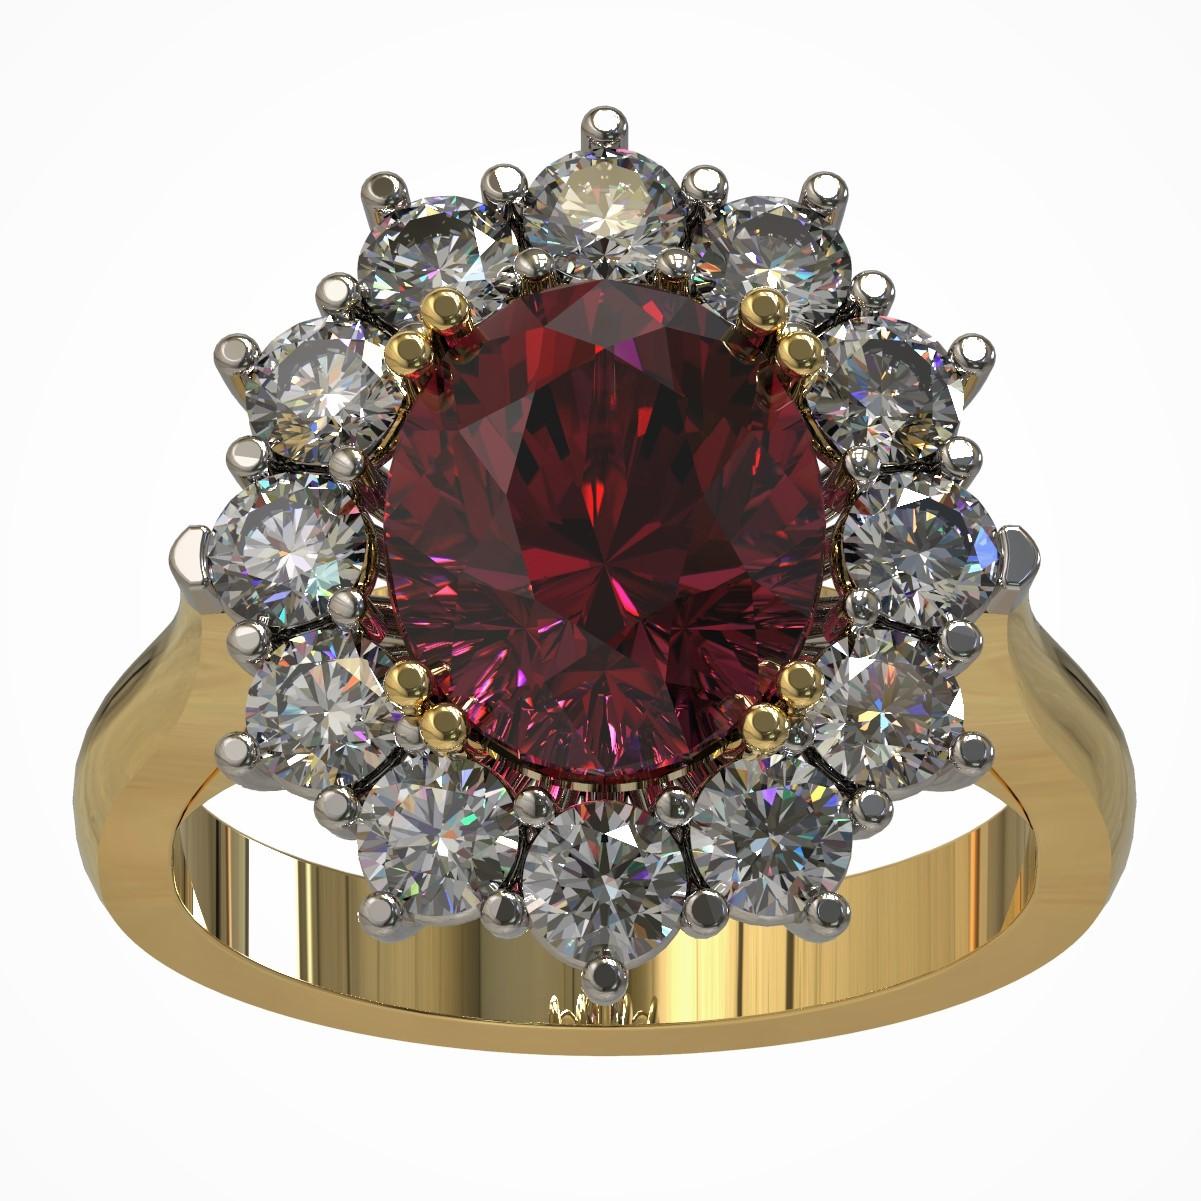 Oval Cut 4.32 Carat Oval Rhodolite and Diamonds Cocktail Ring in Platinum & 18 Carat Gold For Sale